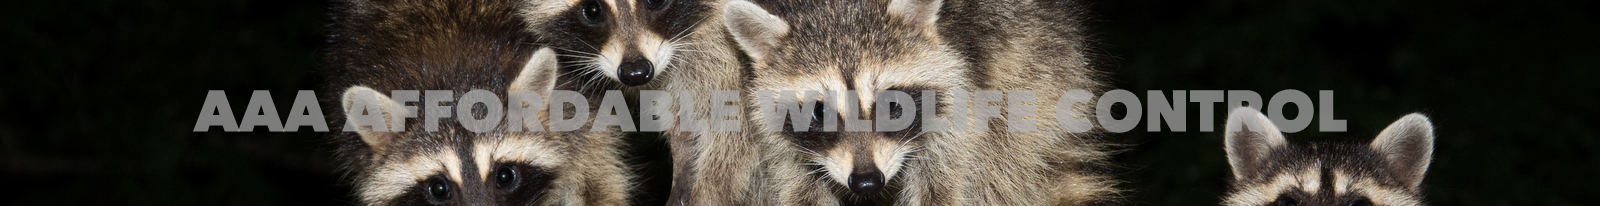 AAA Affordable Wildlife Control Reviews - Raccoon Removal Toronto Reviews, Wildlife Removal Testimonials, Read Wildlife Removal Endorsements